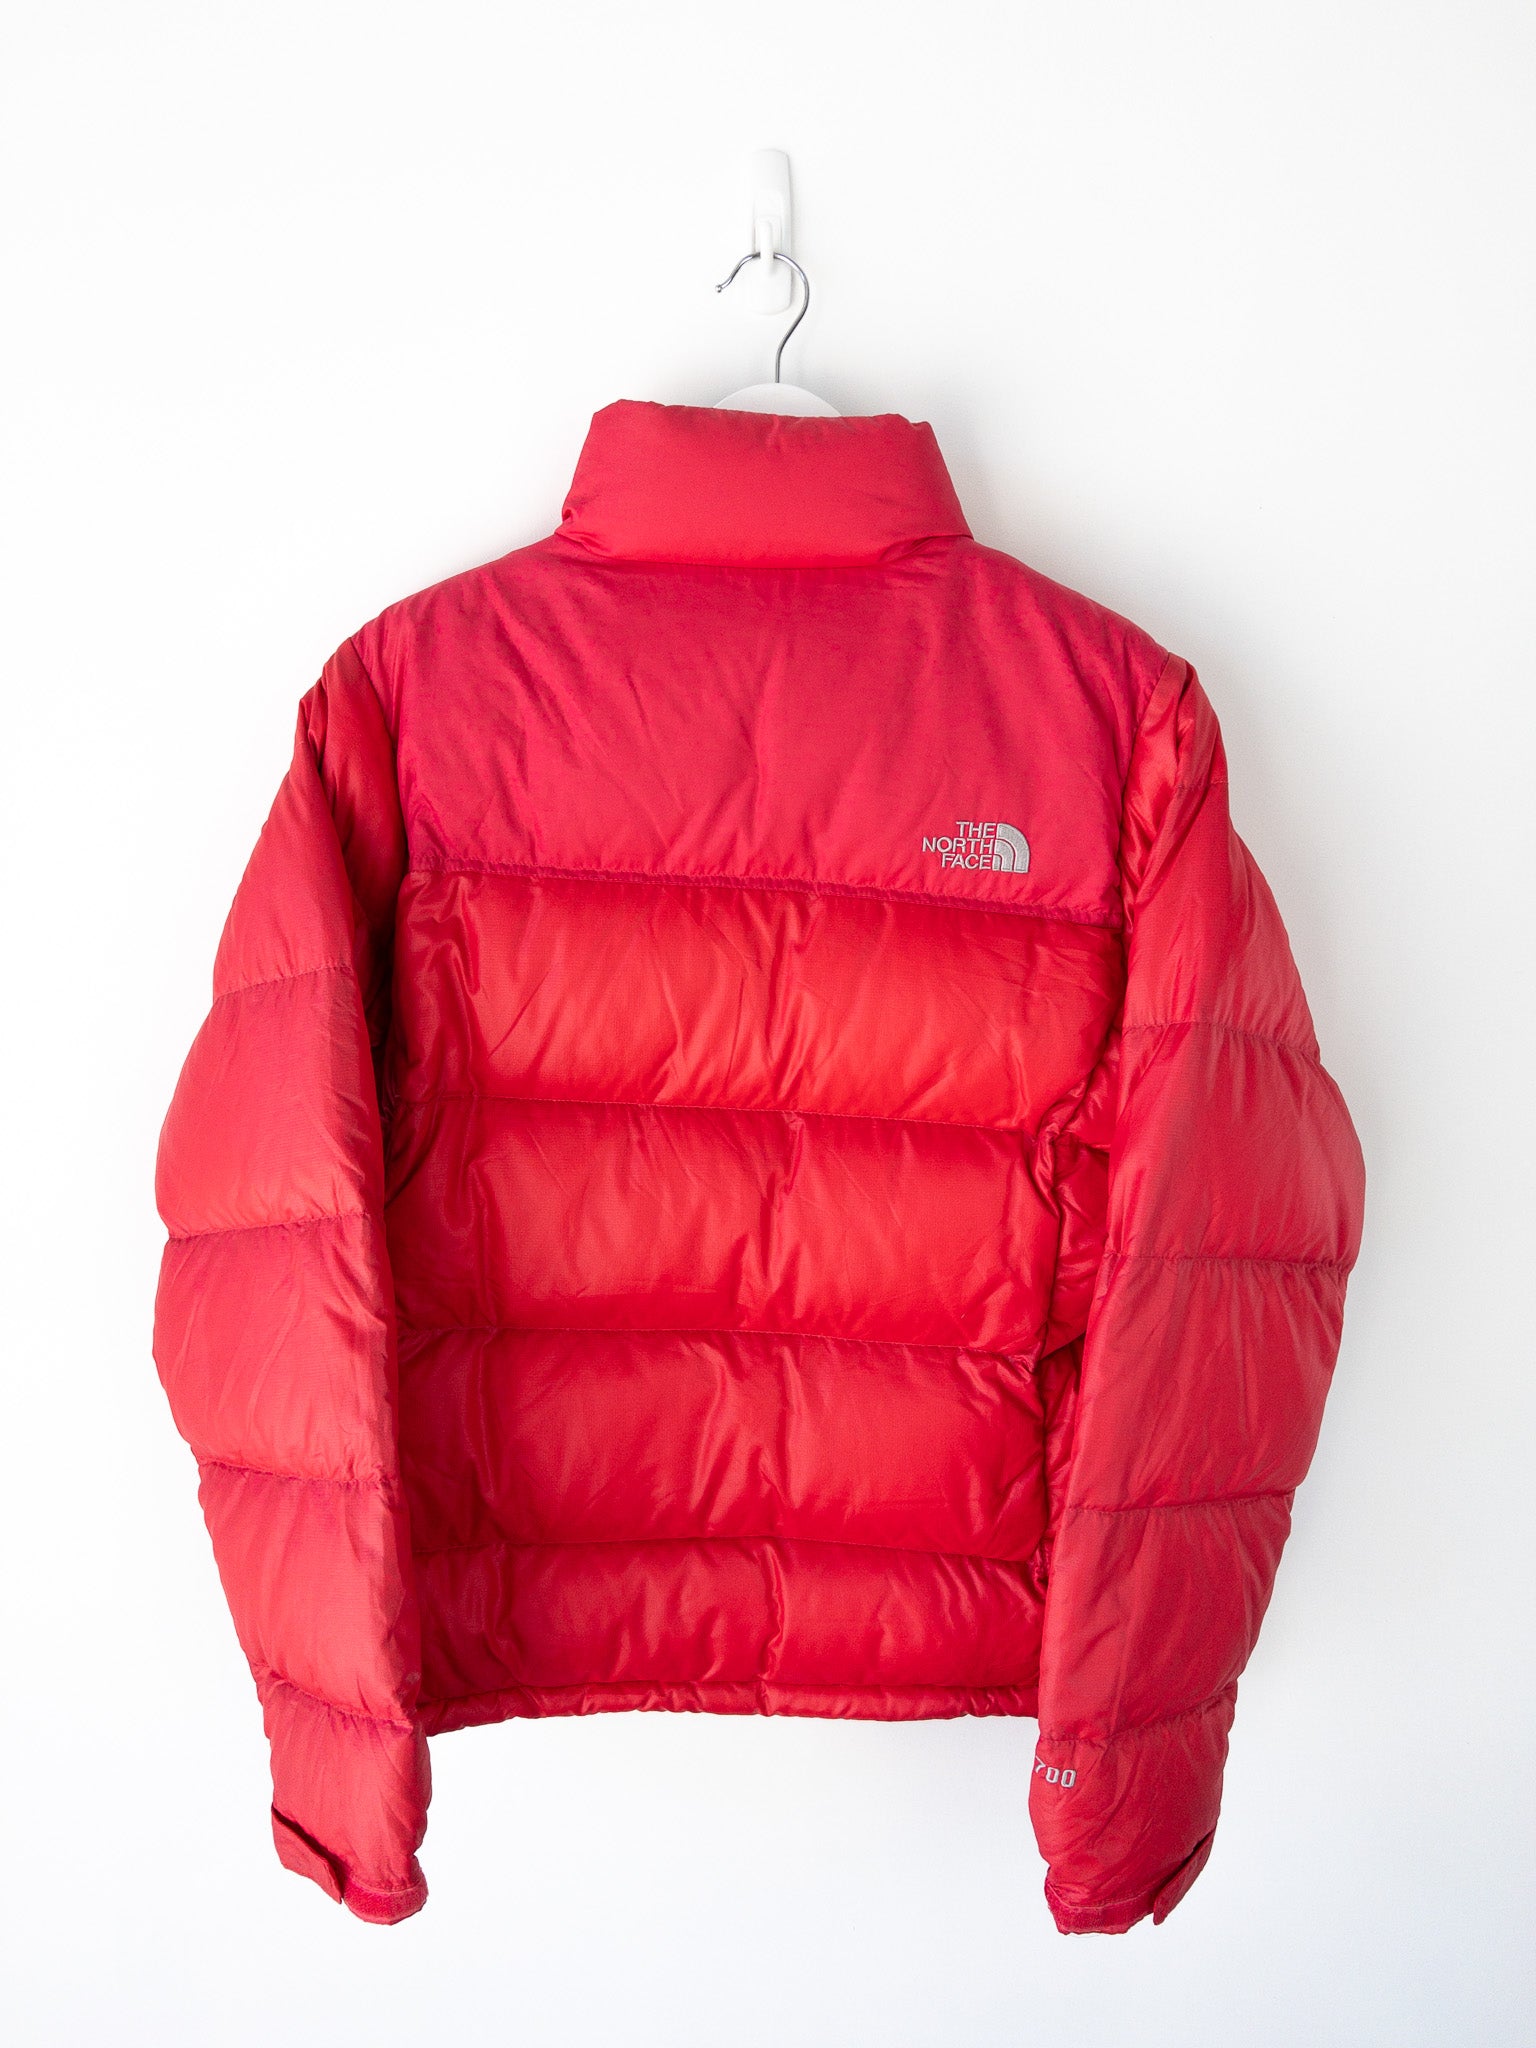 Vintage The North Face 700 Puffer Jacket (S)